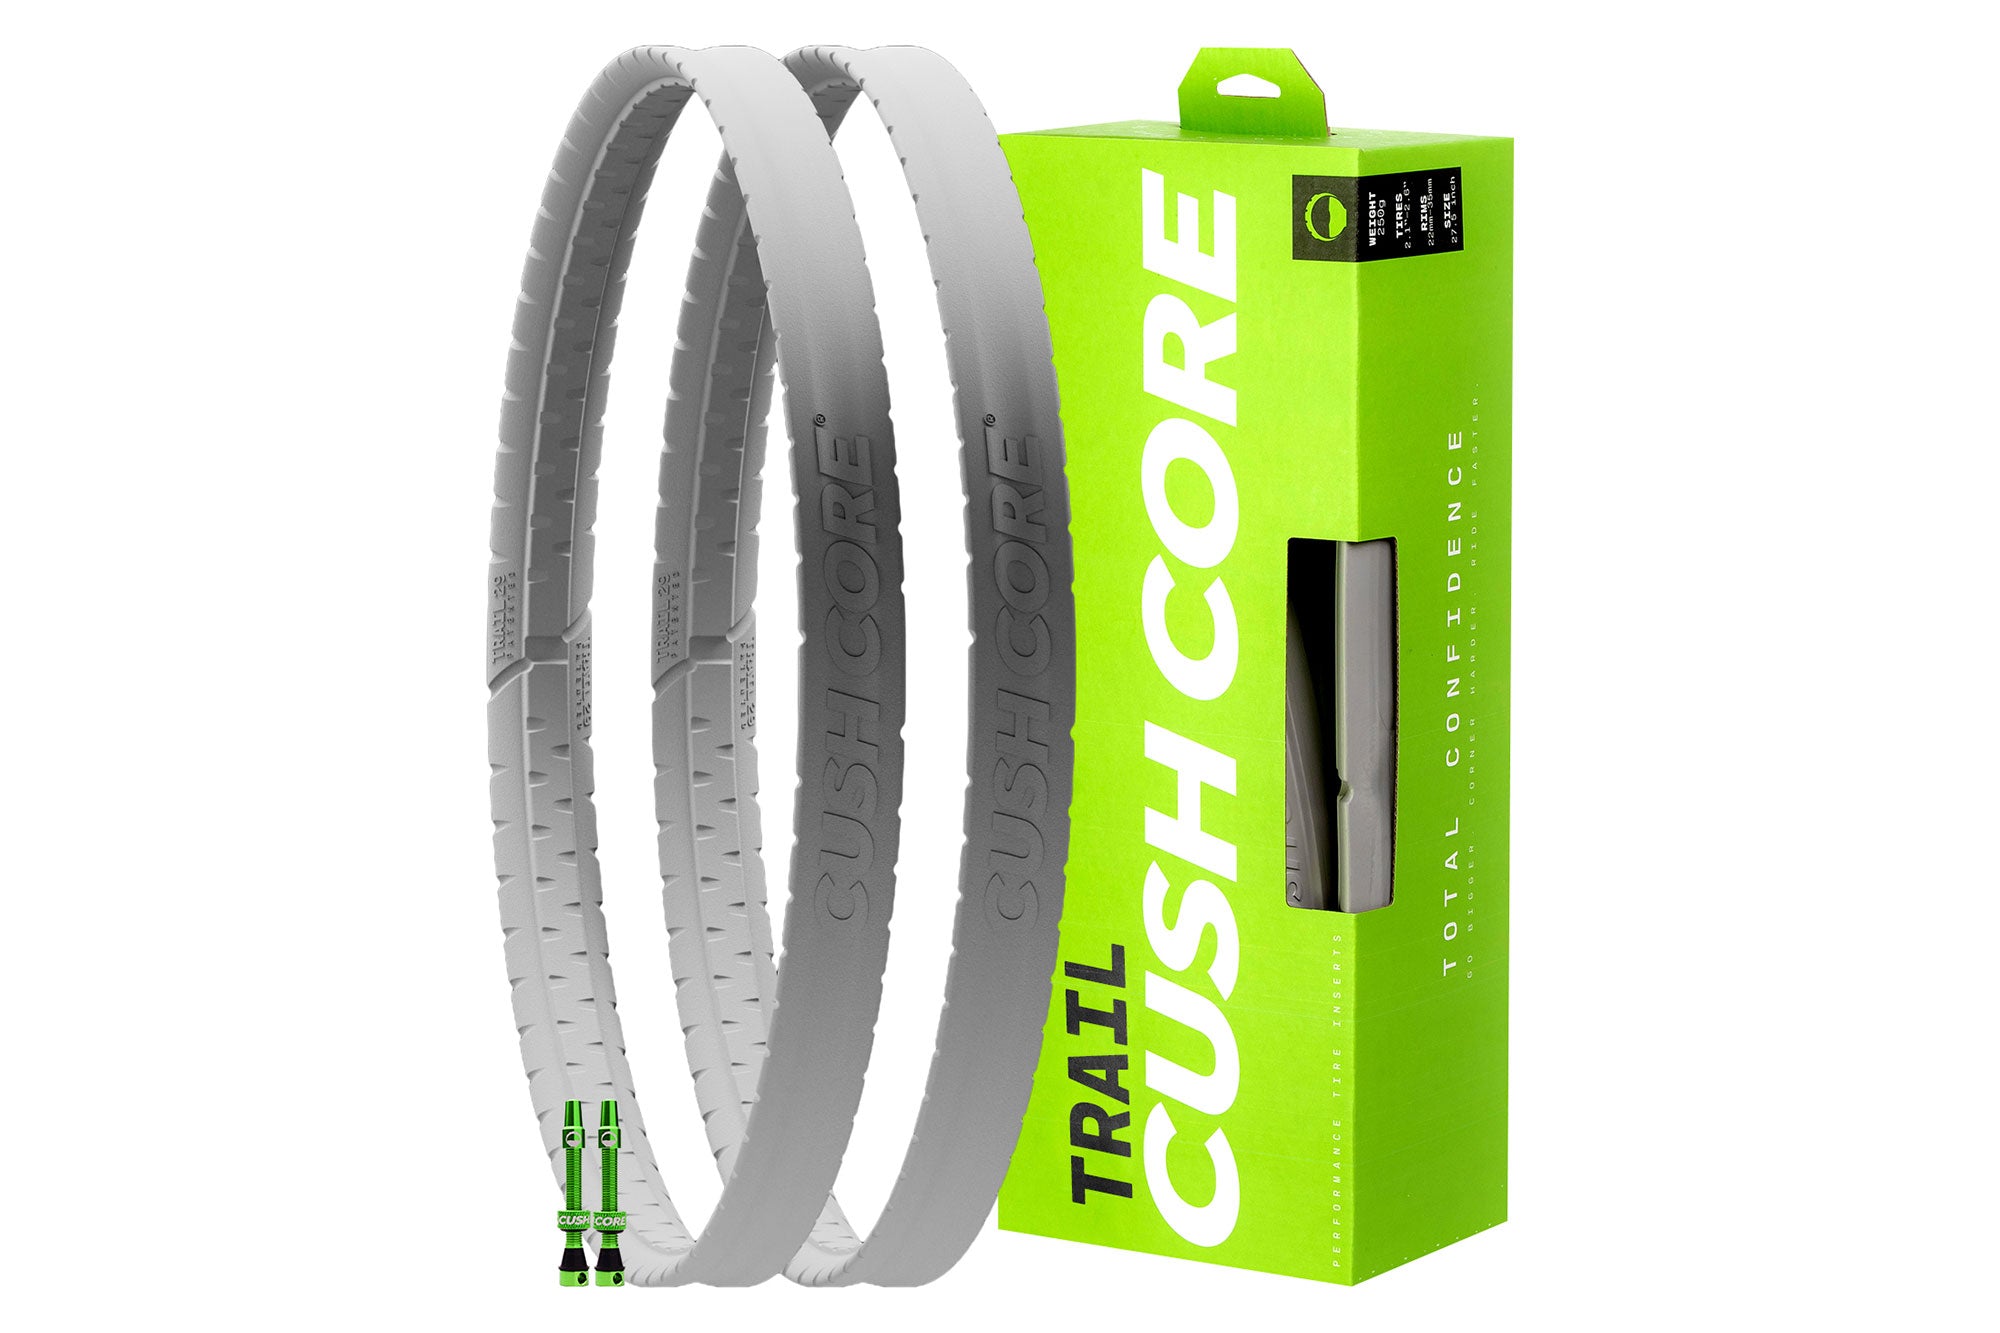 Cushcore Gravel/CX Tubeless Tire Insert Review - What's the